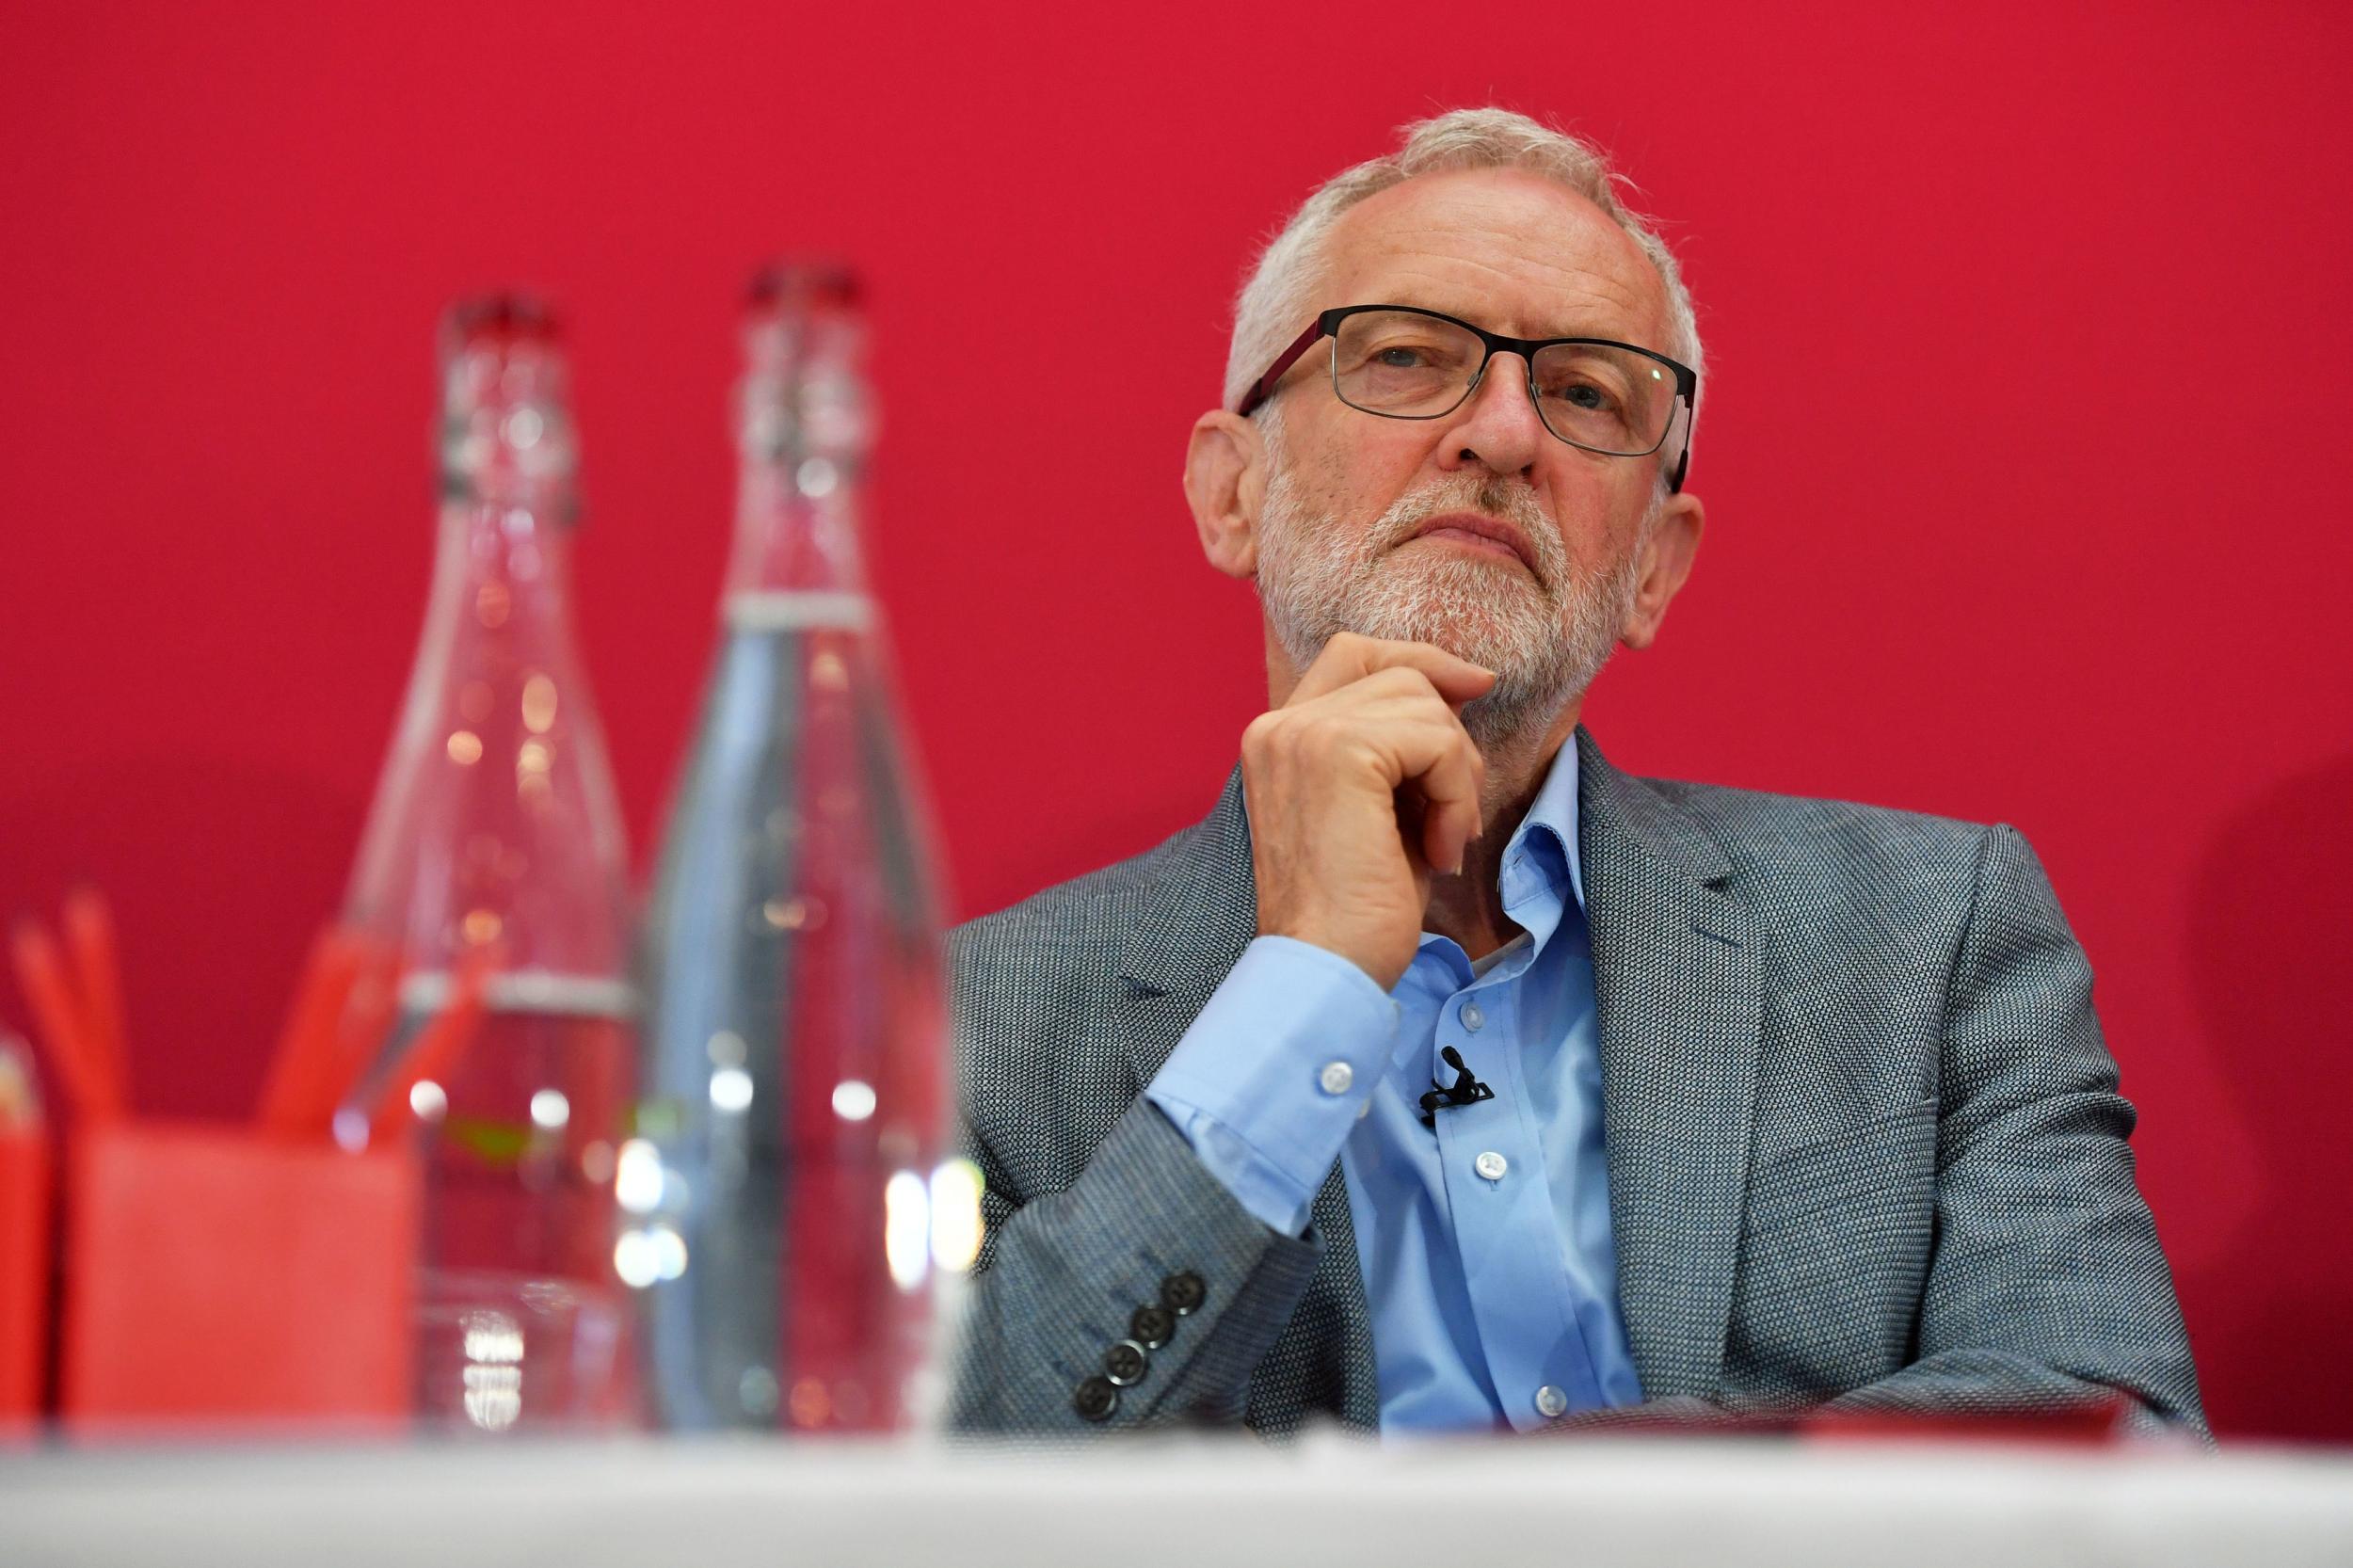 Corbyn needs to move with more speed than he is showing